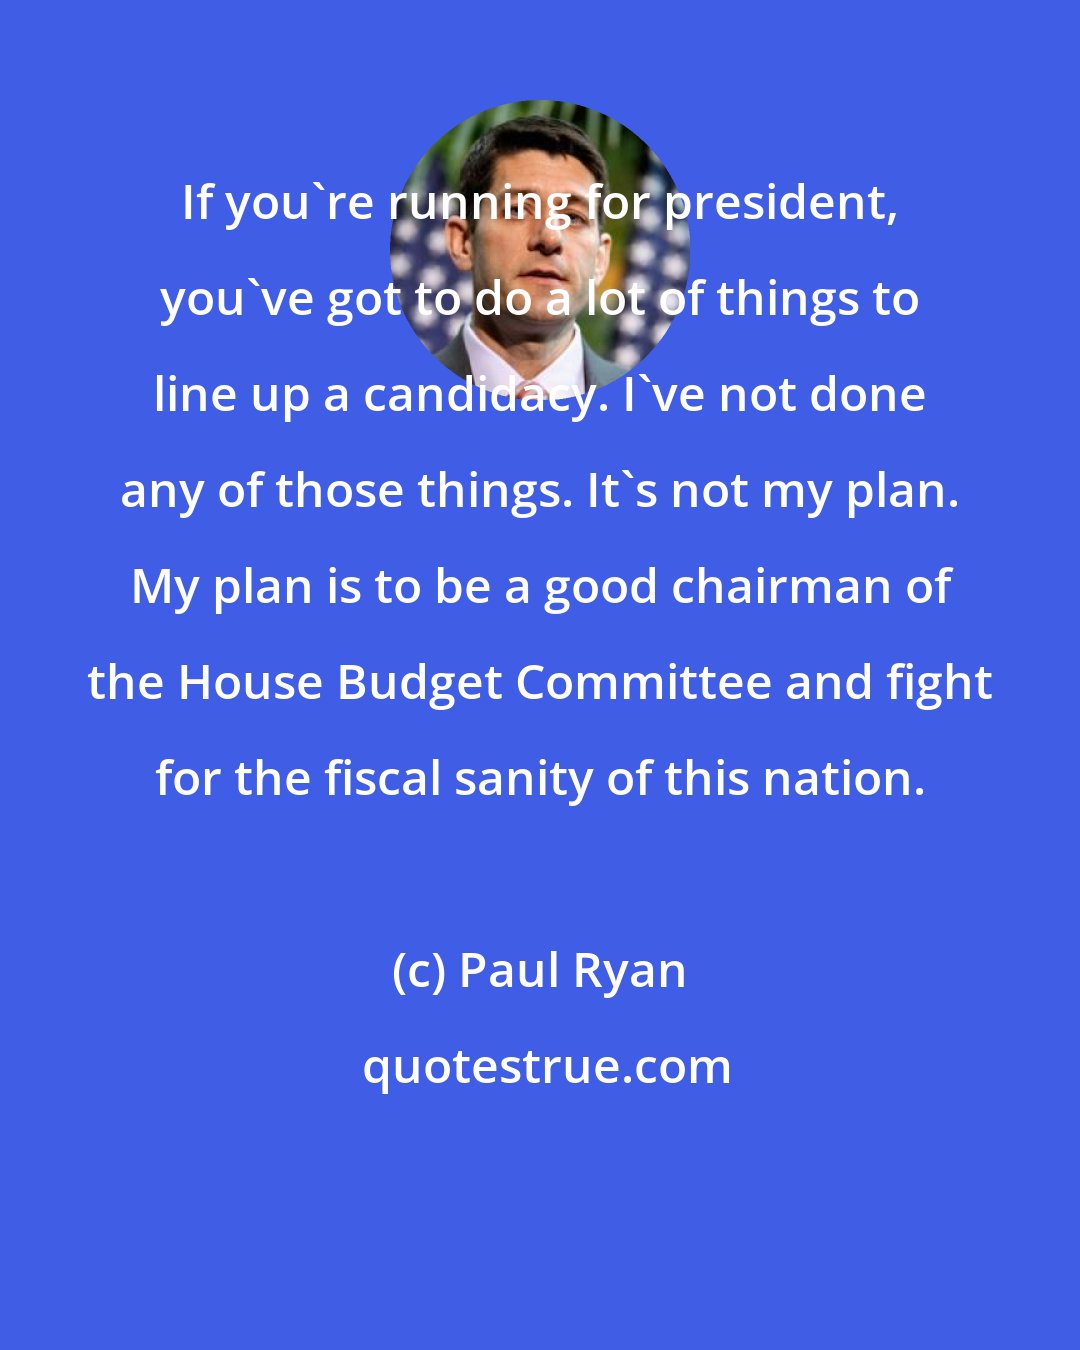 Paul Ryan: If you're running for president, you've got to do a lot of things to line up a candidacy. I've not done any of those things. It's not my plan. My plan is to be a good chairman of the House Budget Committee and fight for the fiscal sanity of this nation.